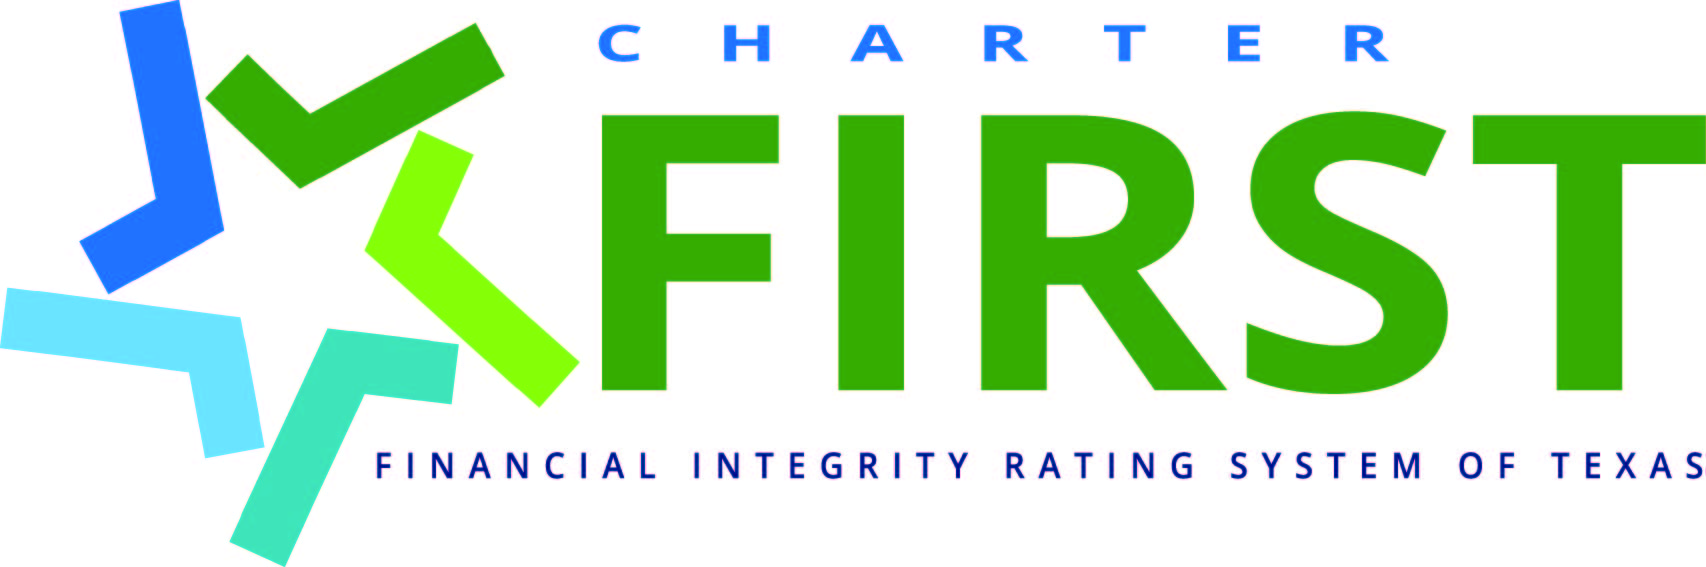 Charter-First-logo-color